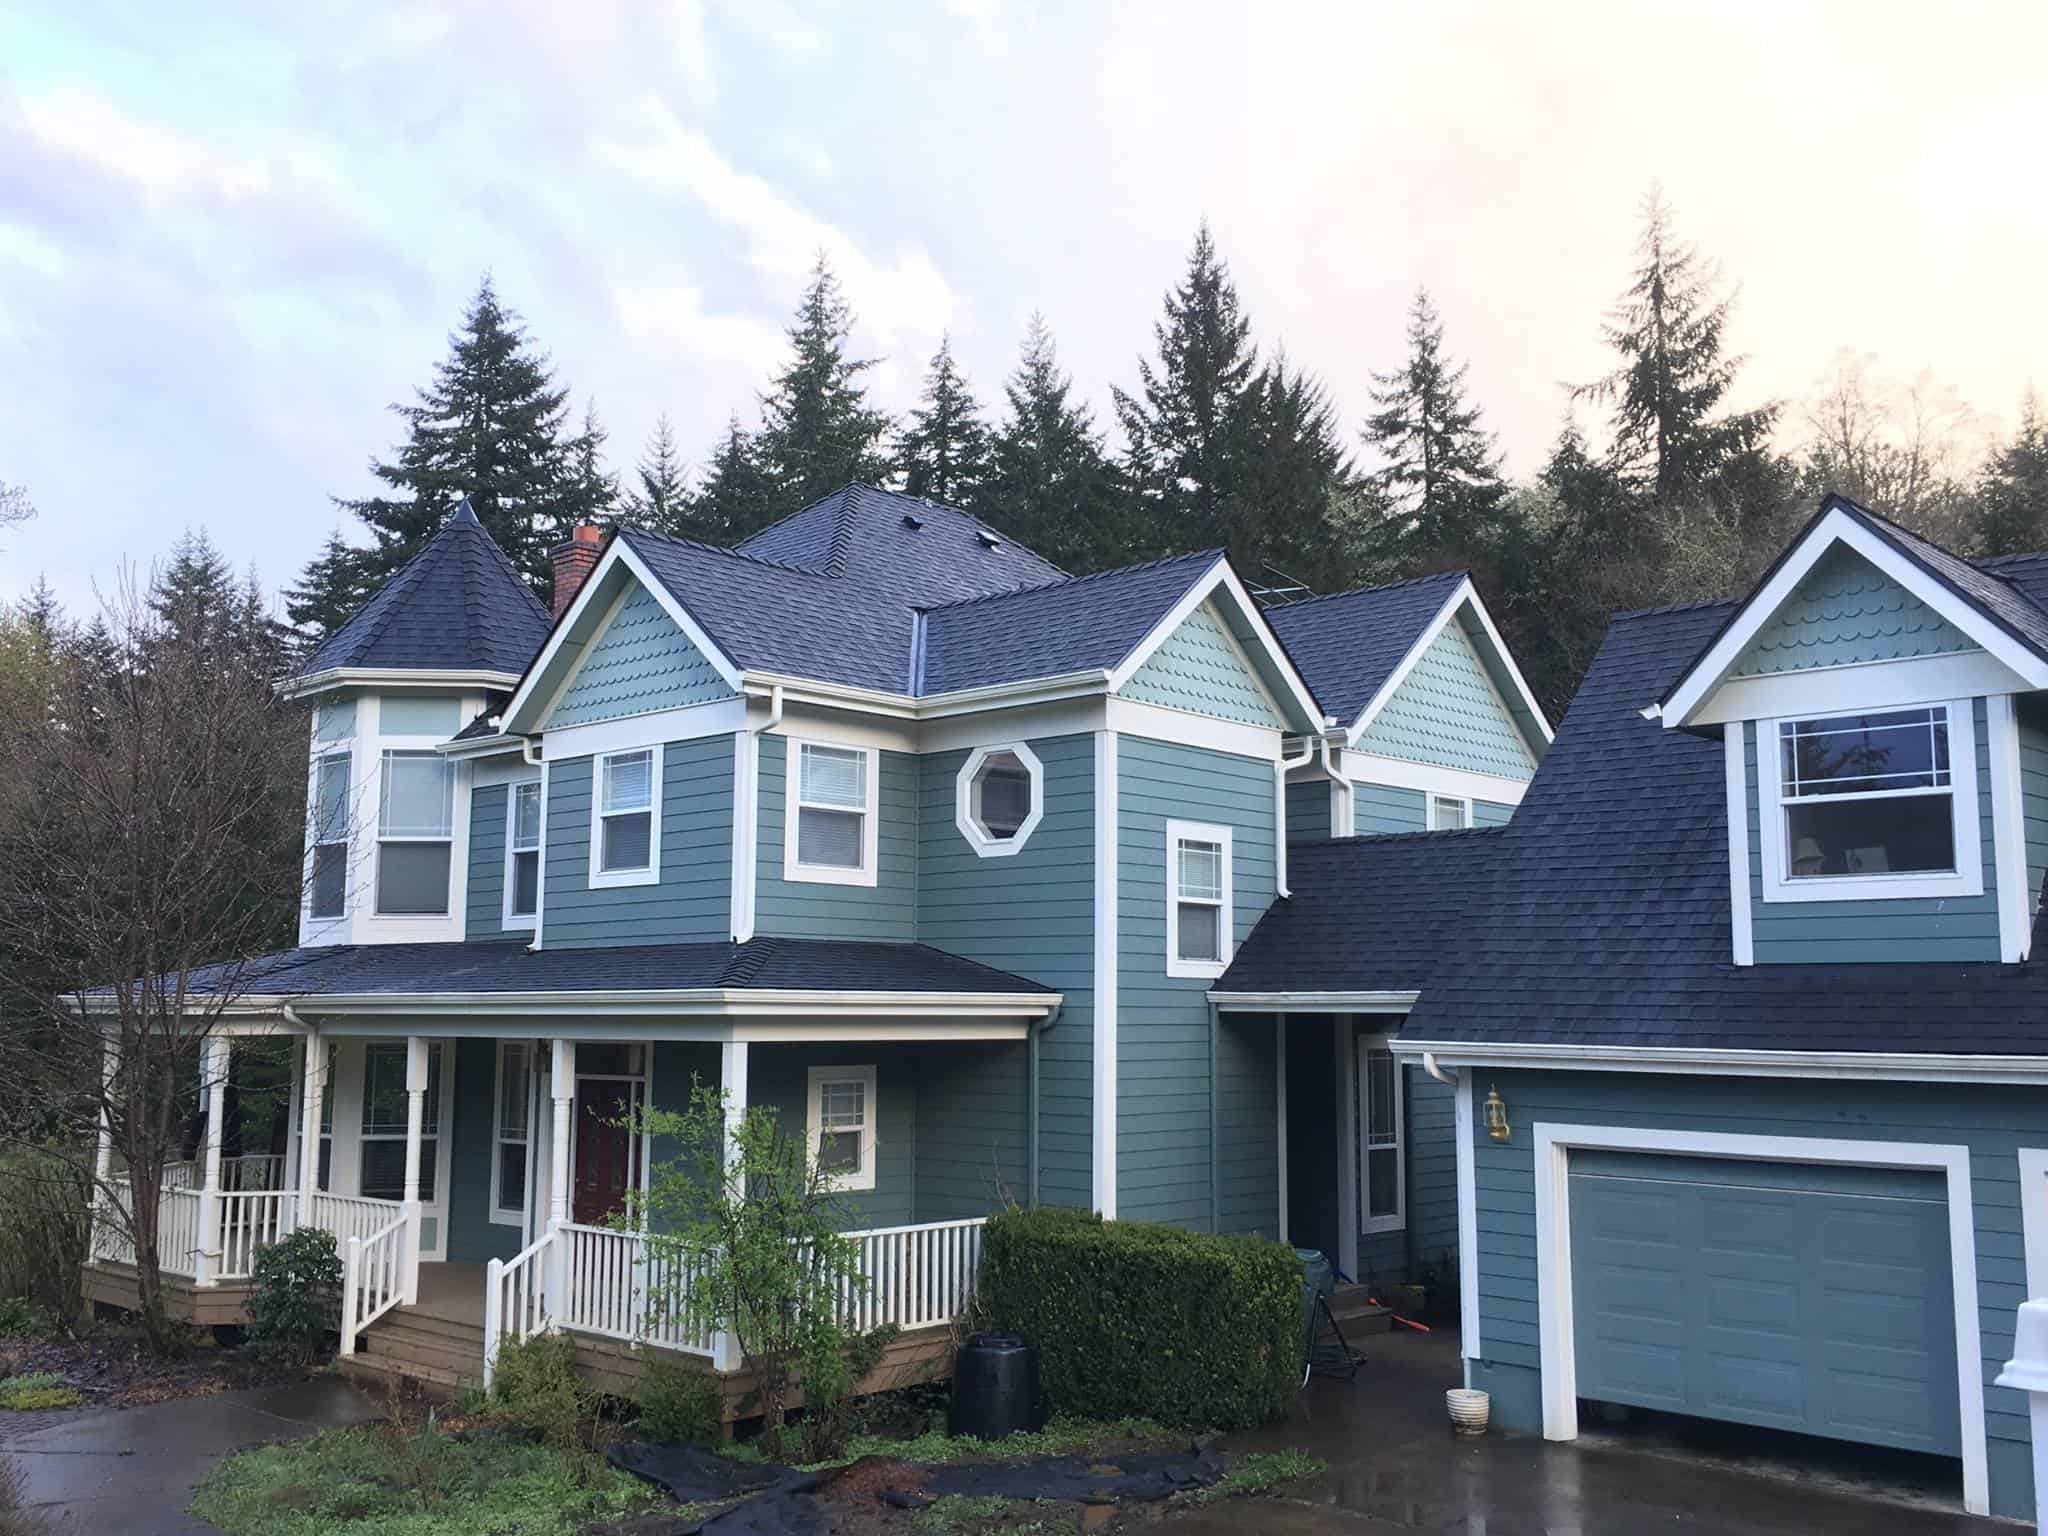 Valley Roofing did this Unique home with many Peaks Salem, Oregon